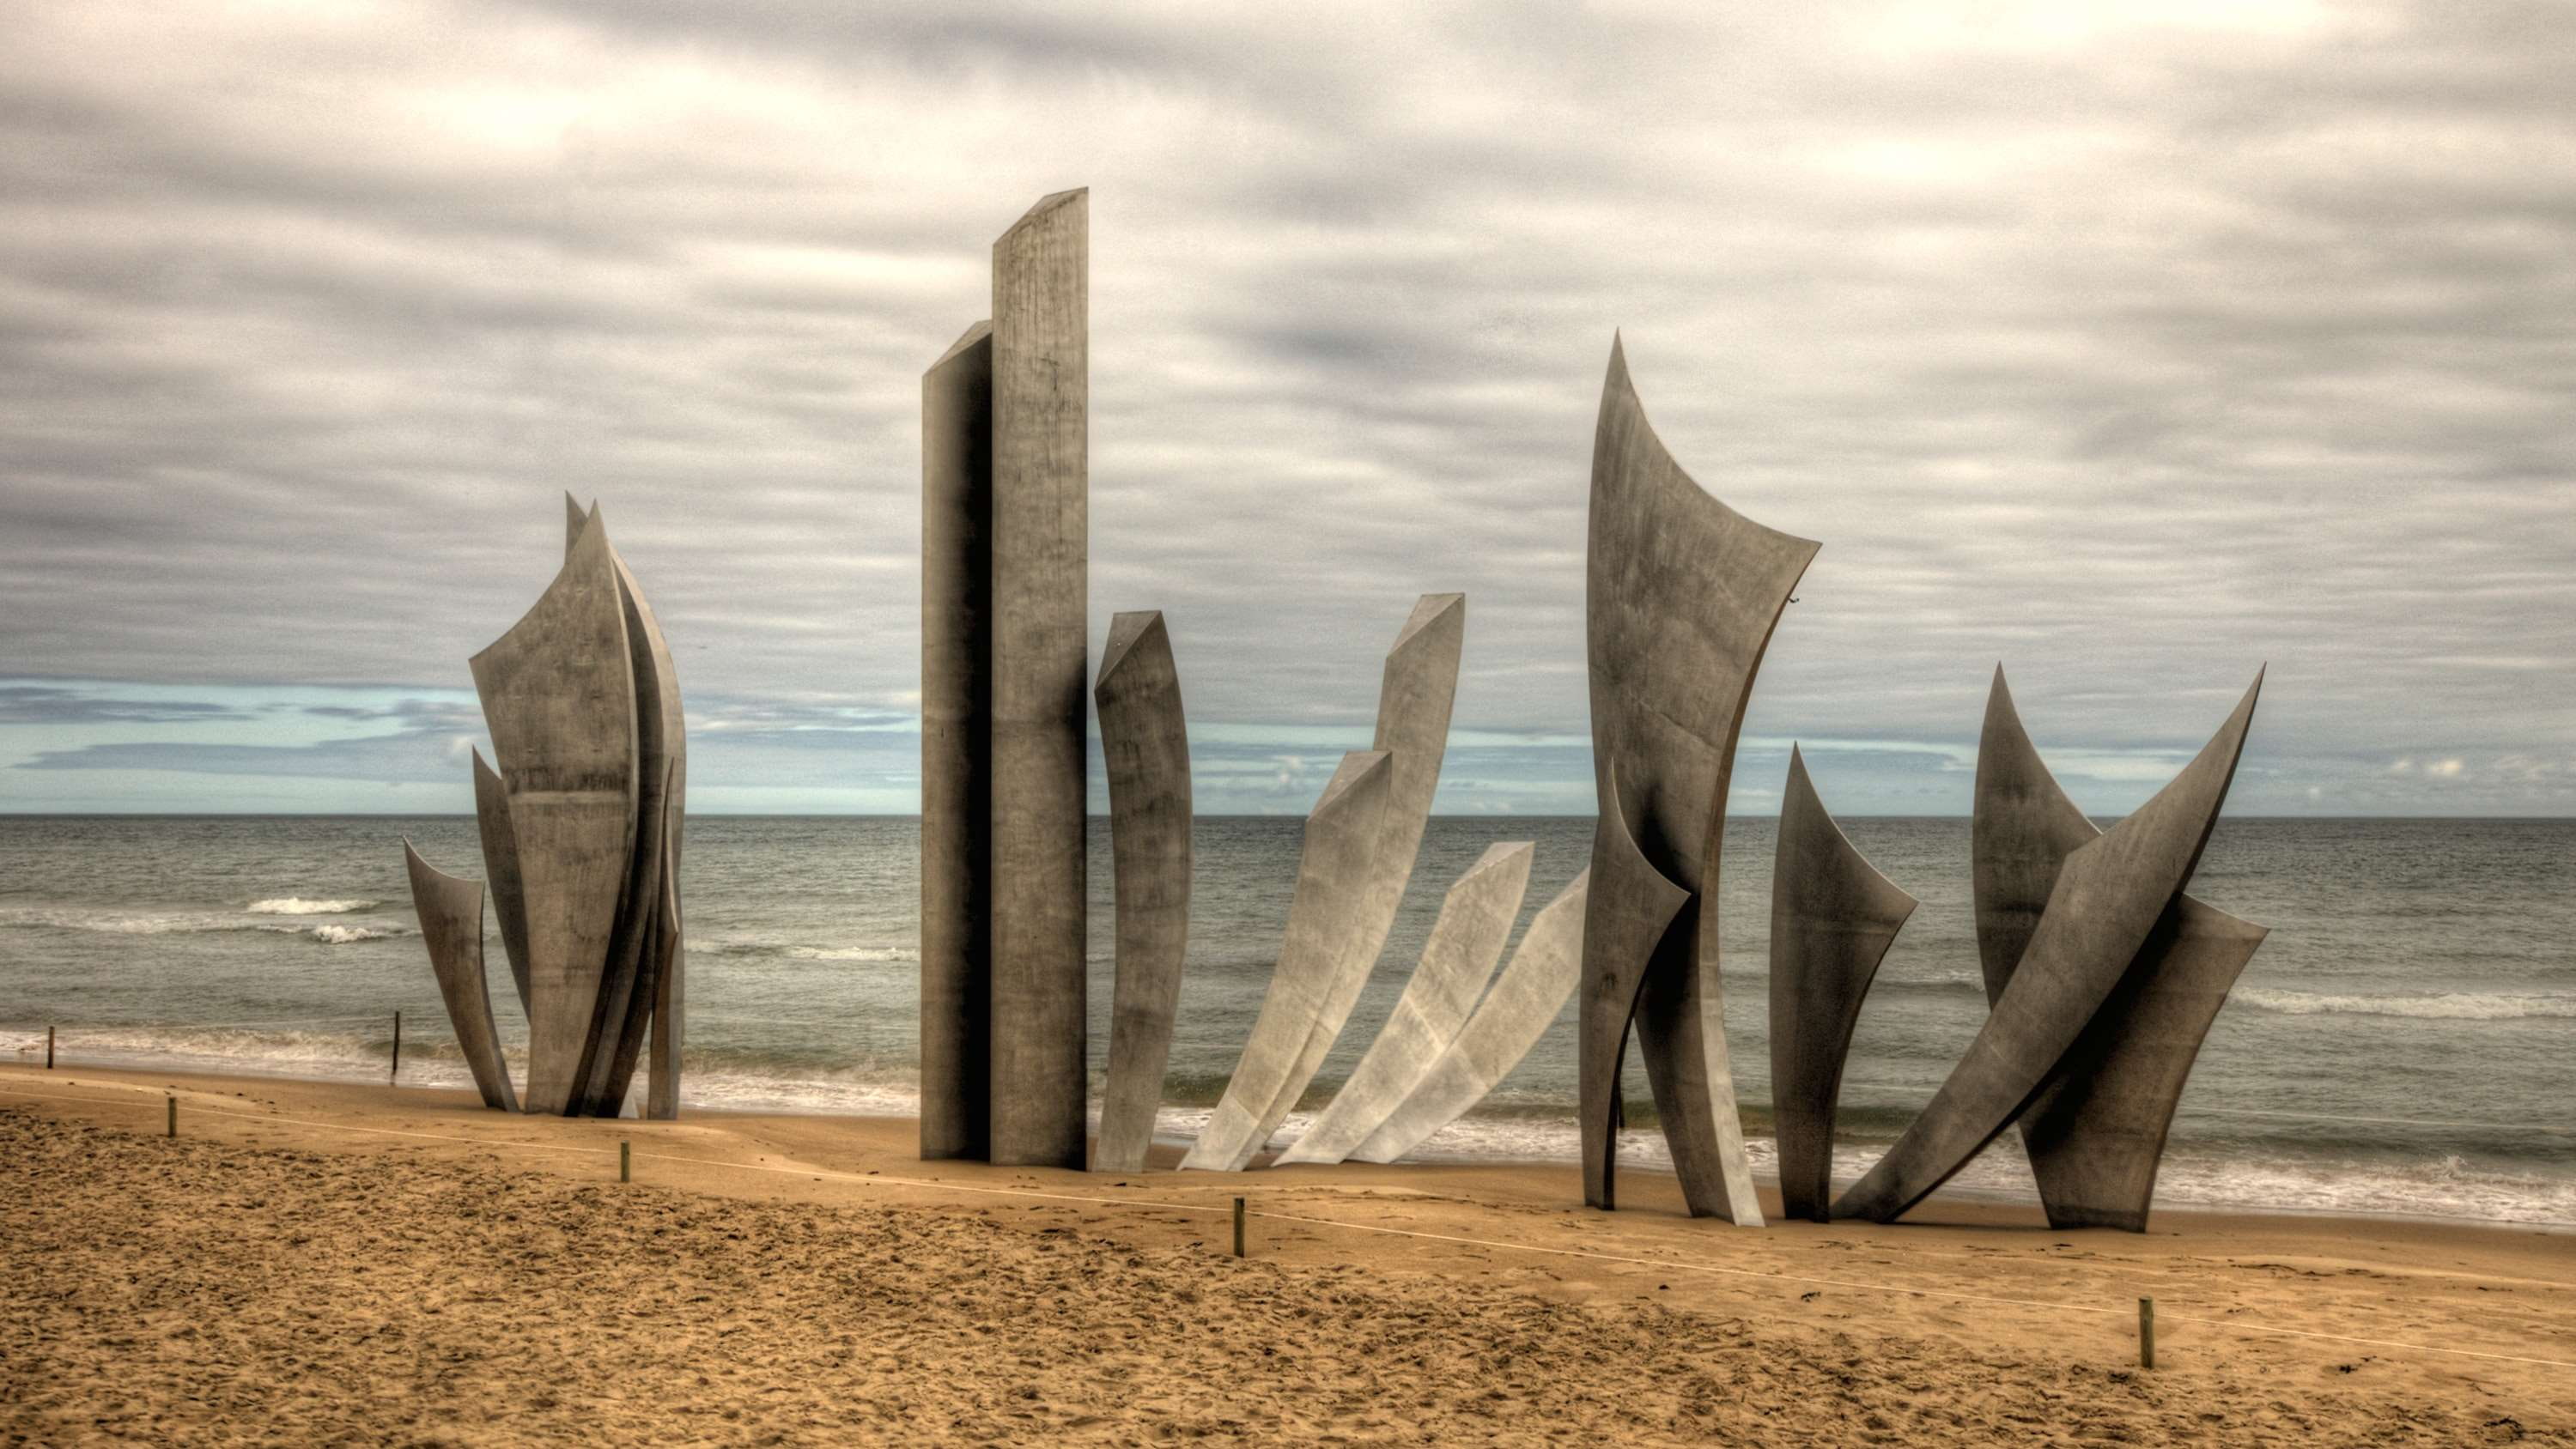 beach, d day, dog green, france, monument des braves, normandy